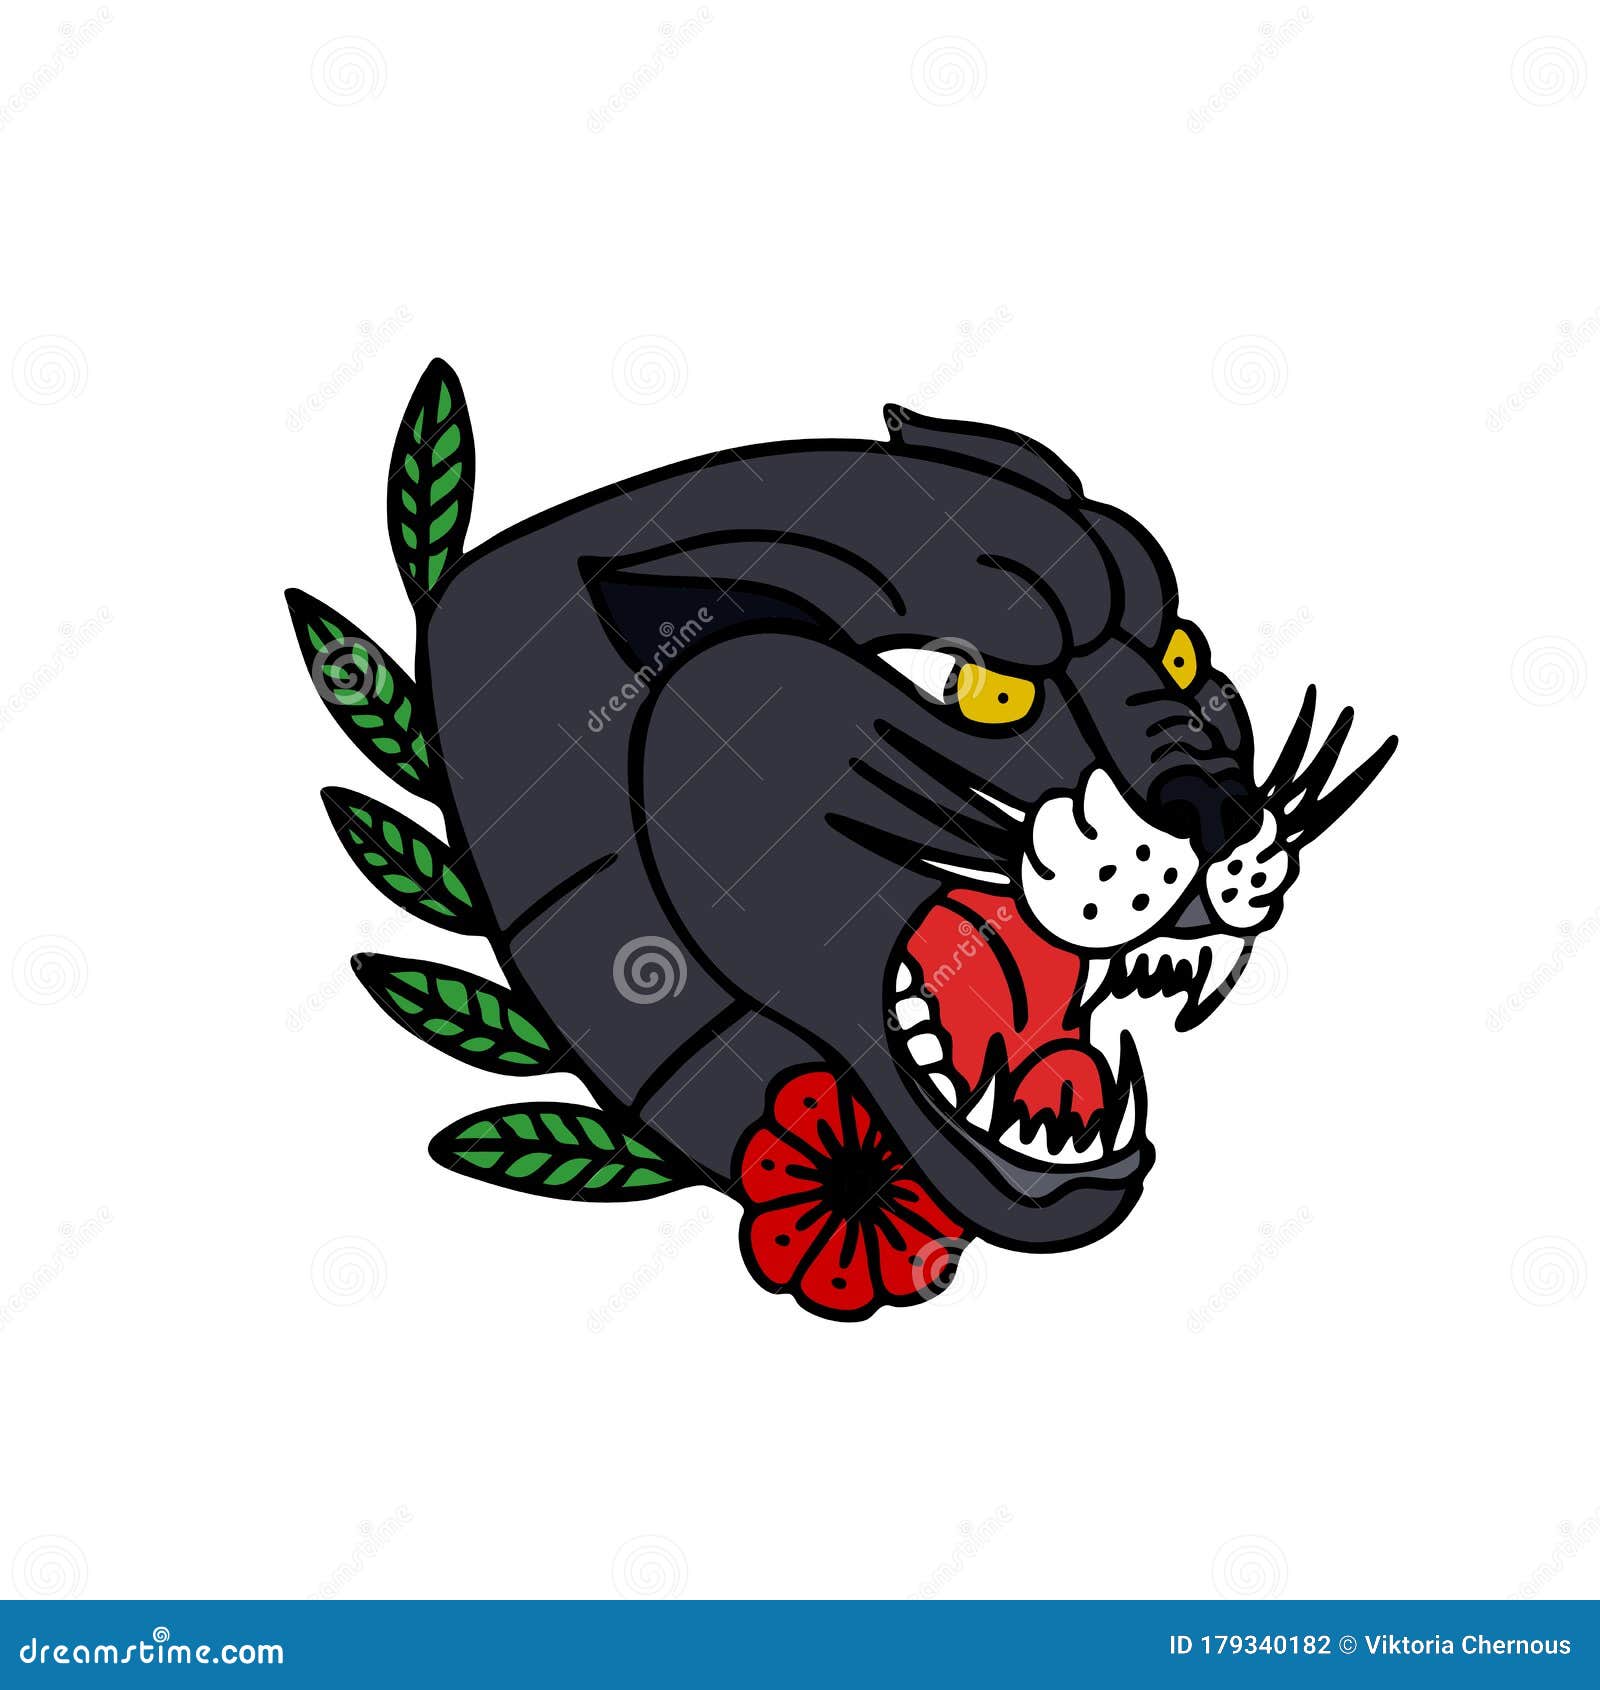 Black panther traditional tattoo Royalty Free Vector Image